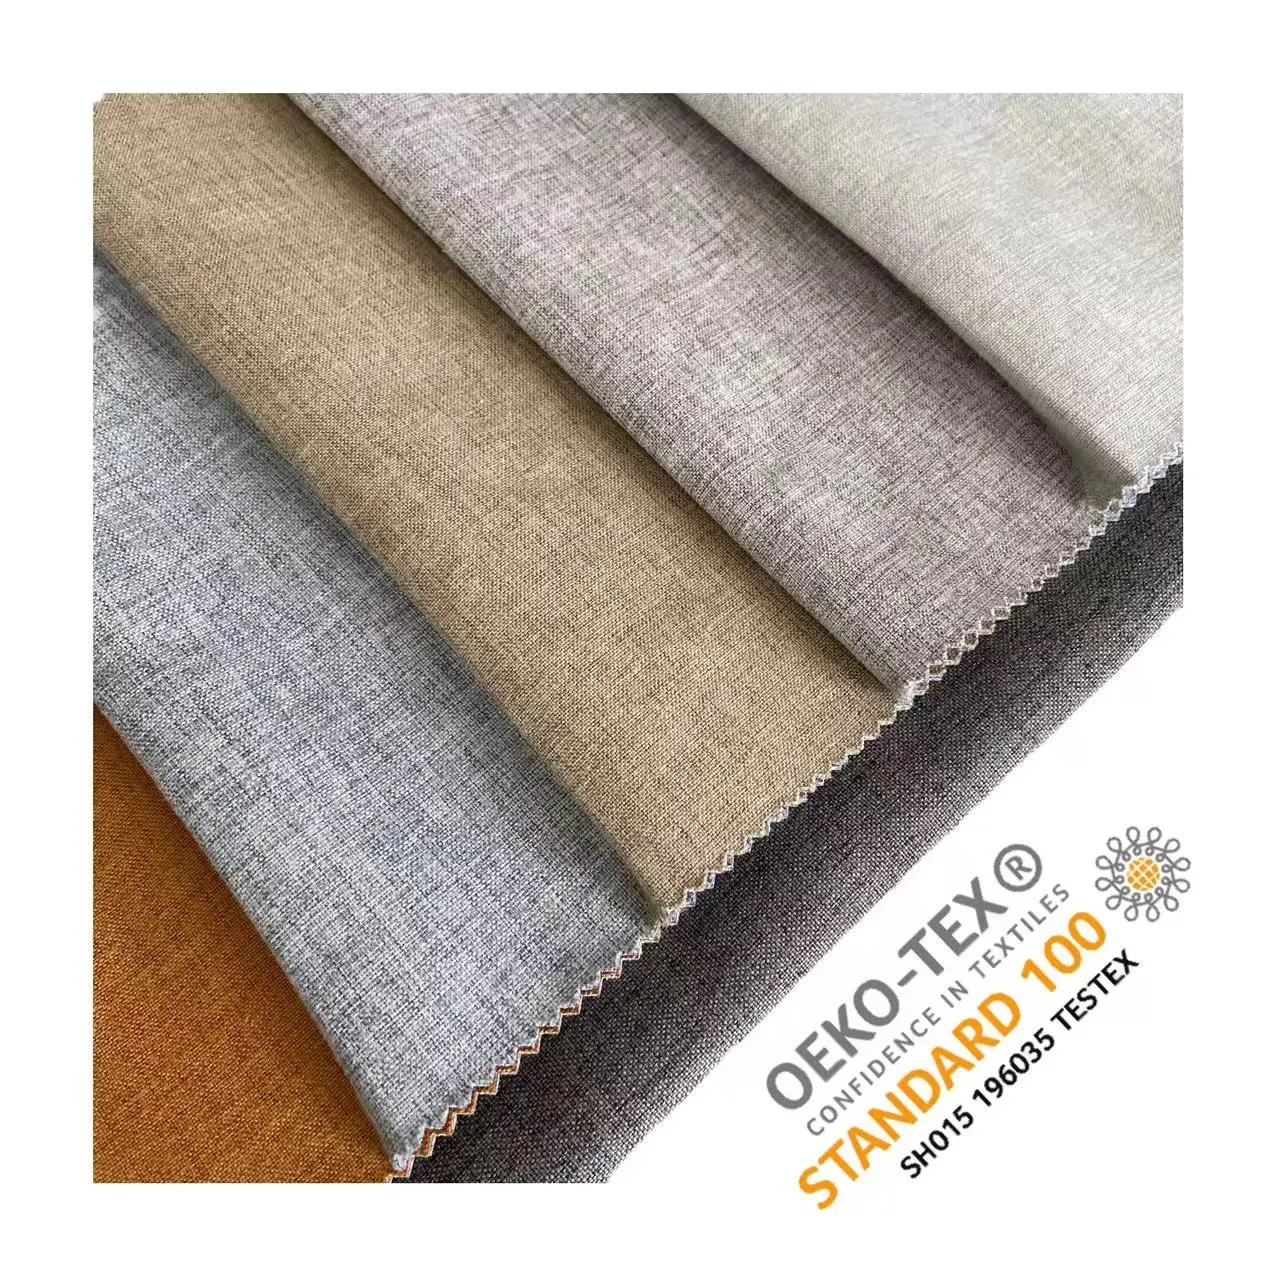 Manufacturers of high quality of curtain fabrics double sides textured linen 100%blackout curtain fabric